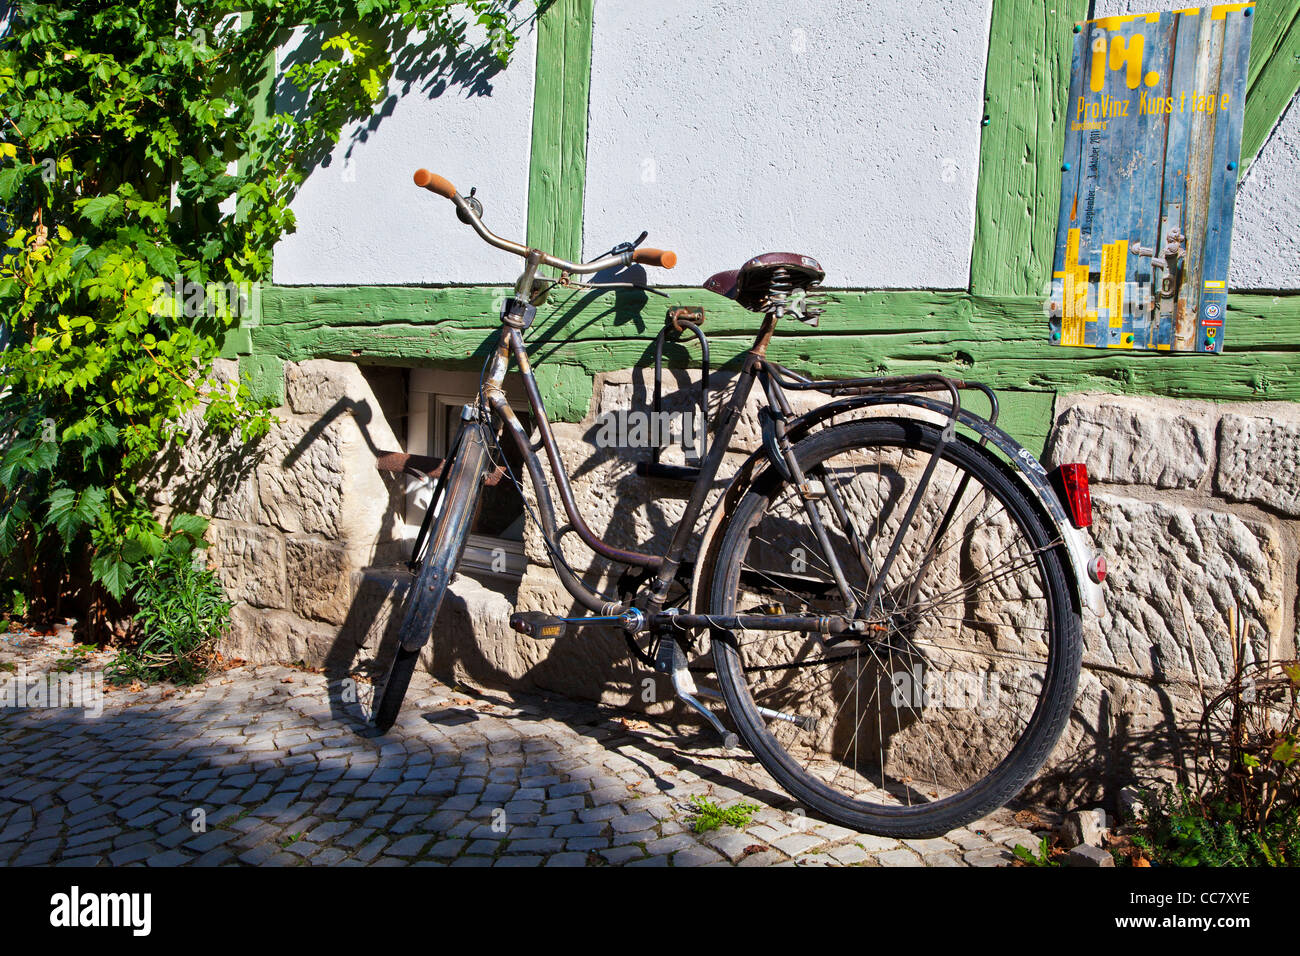 Rusty old bike in a cobbled street of half-timbered medieval houses in the UNESCO World Heritage town of Quedlinburg, Germany. Stock Photo